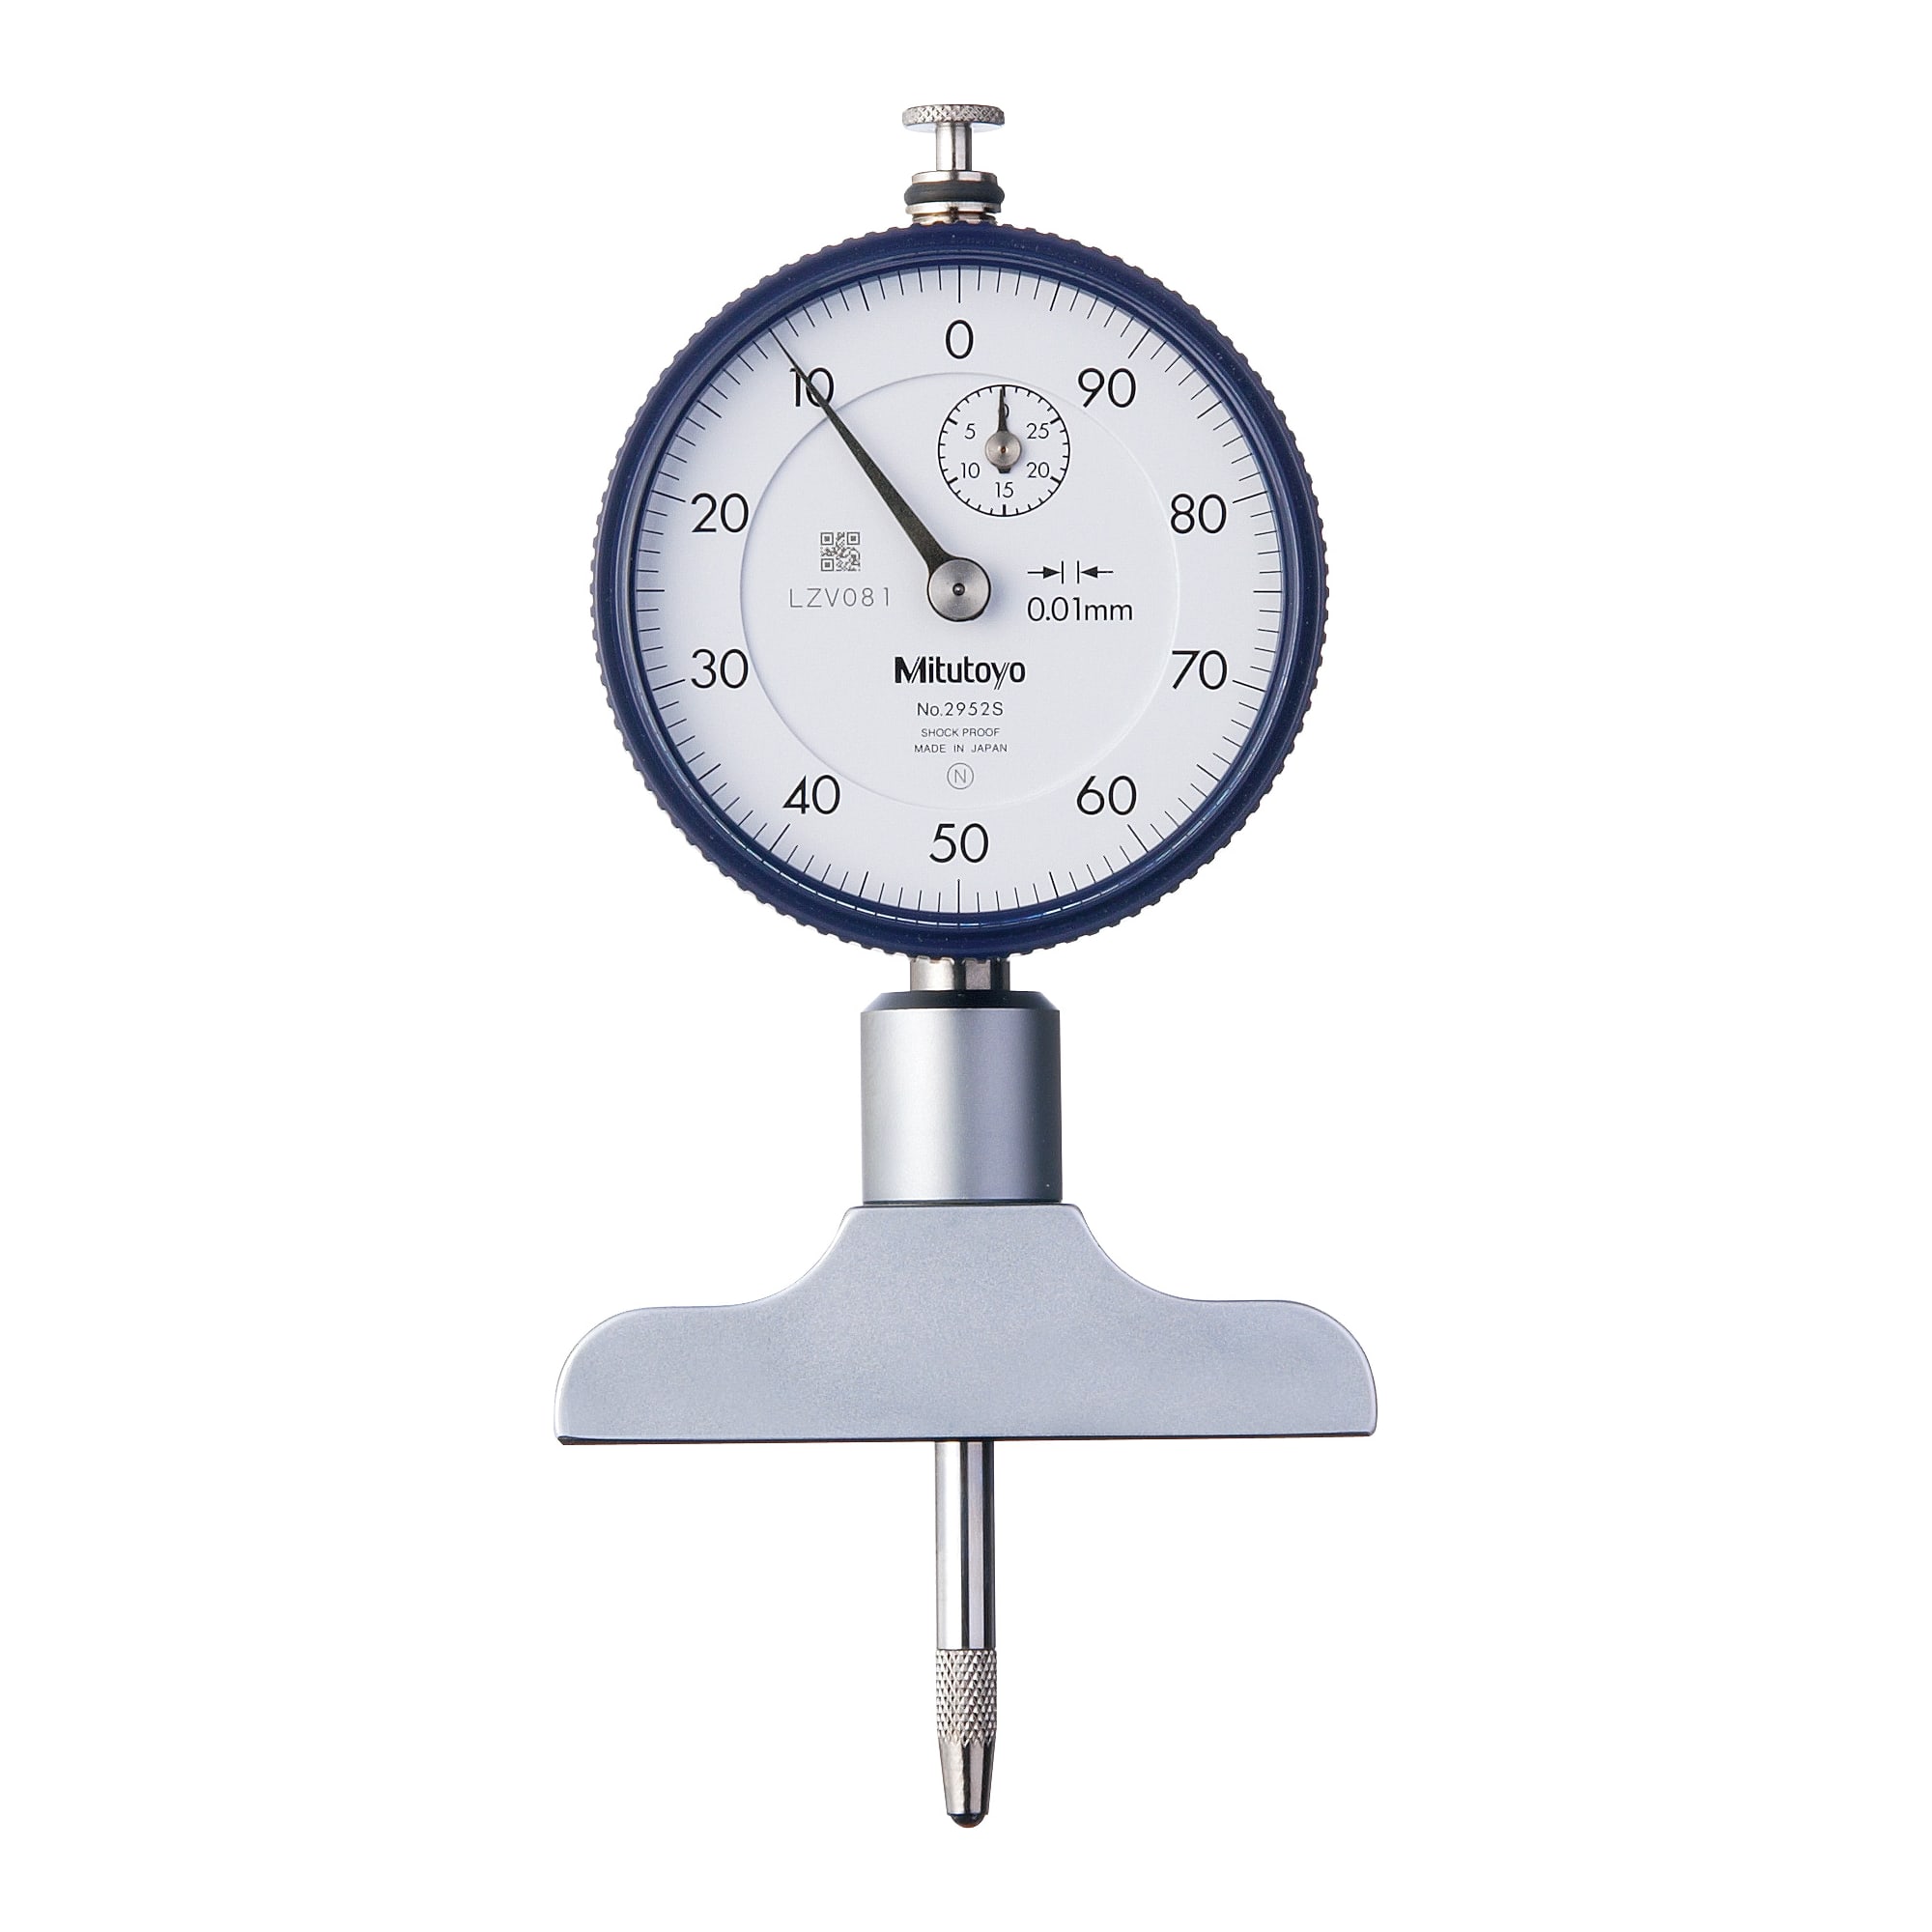 Dial Gage Supports For Depth Measurement Dial Indicator Depth Gage Bottom Base 